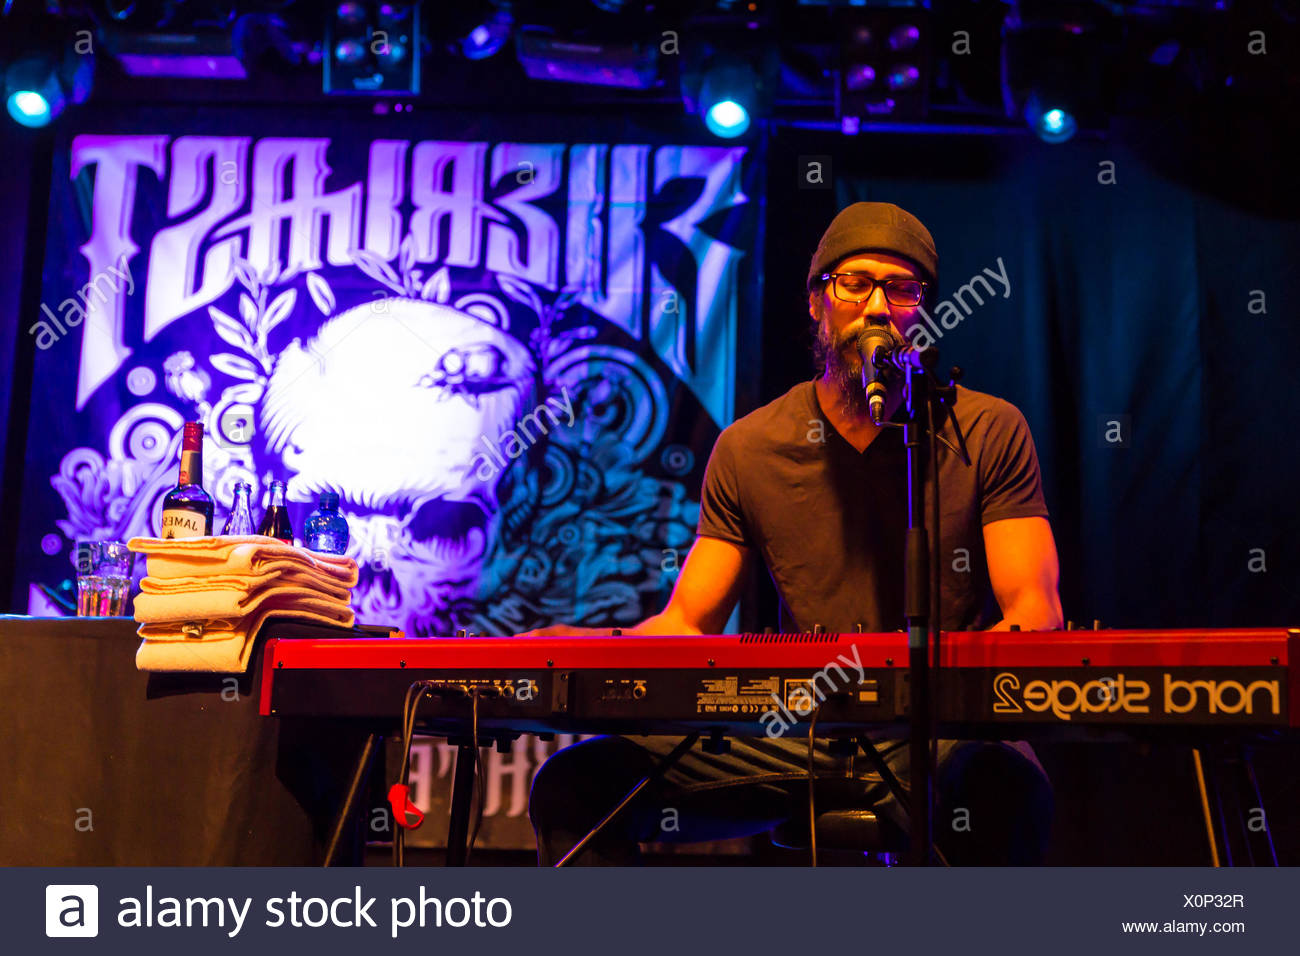 Everlast Musician Concert High Resolution Stock Photography and Images ...